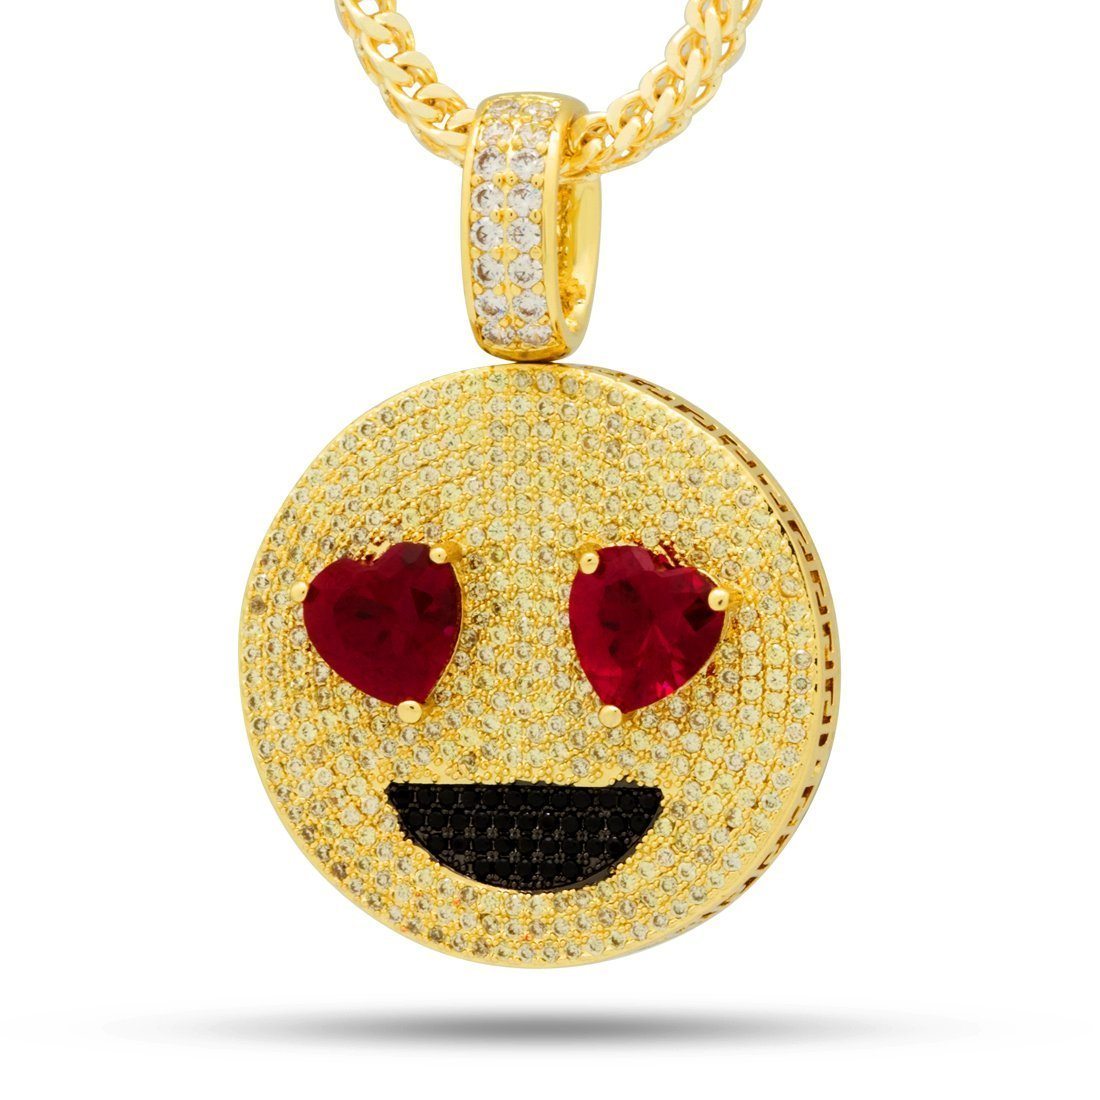 Image of The Heart Eyes, Angry Face Emoji Necklace